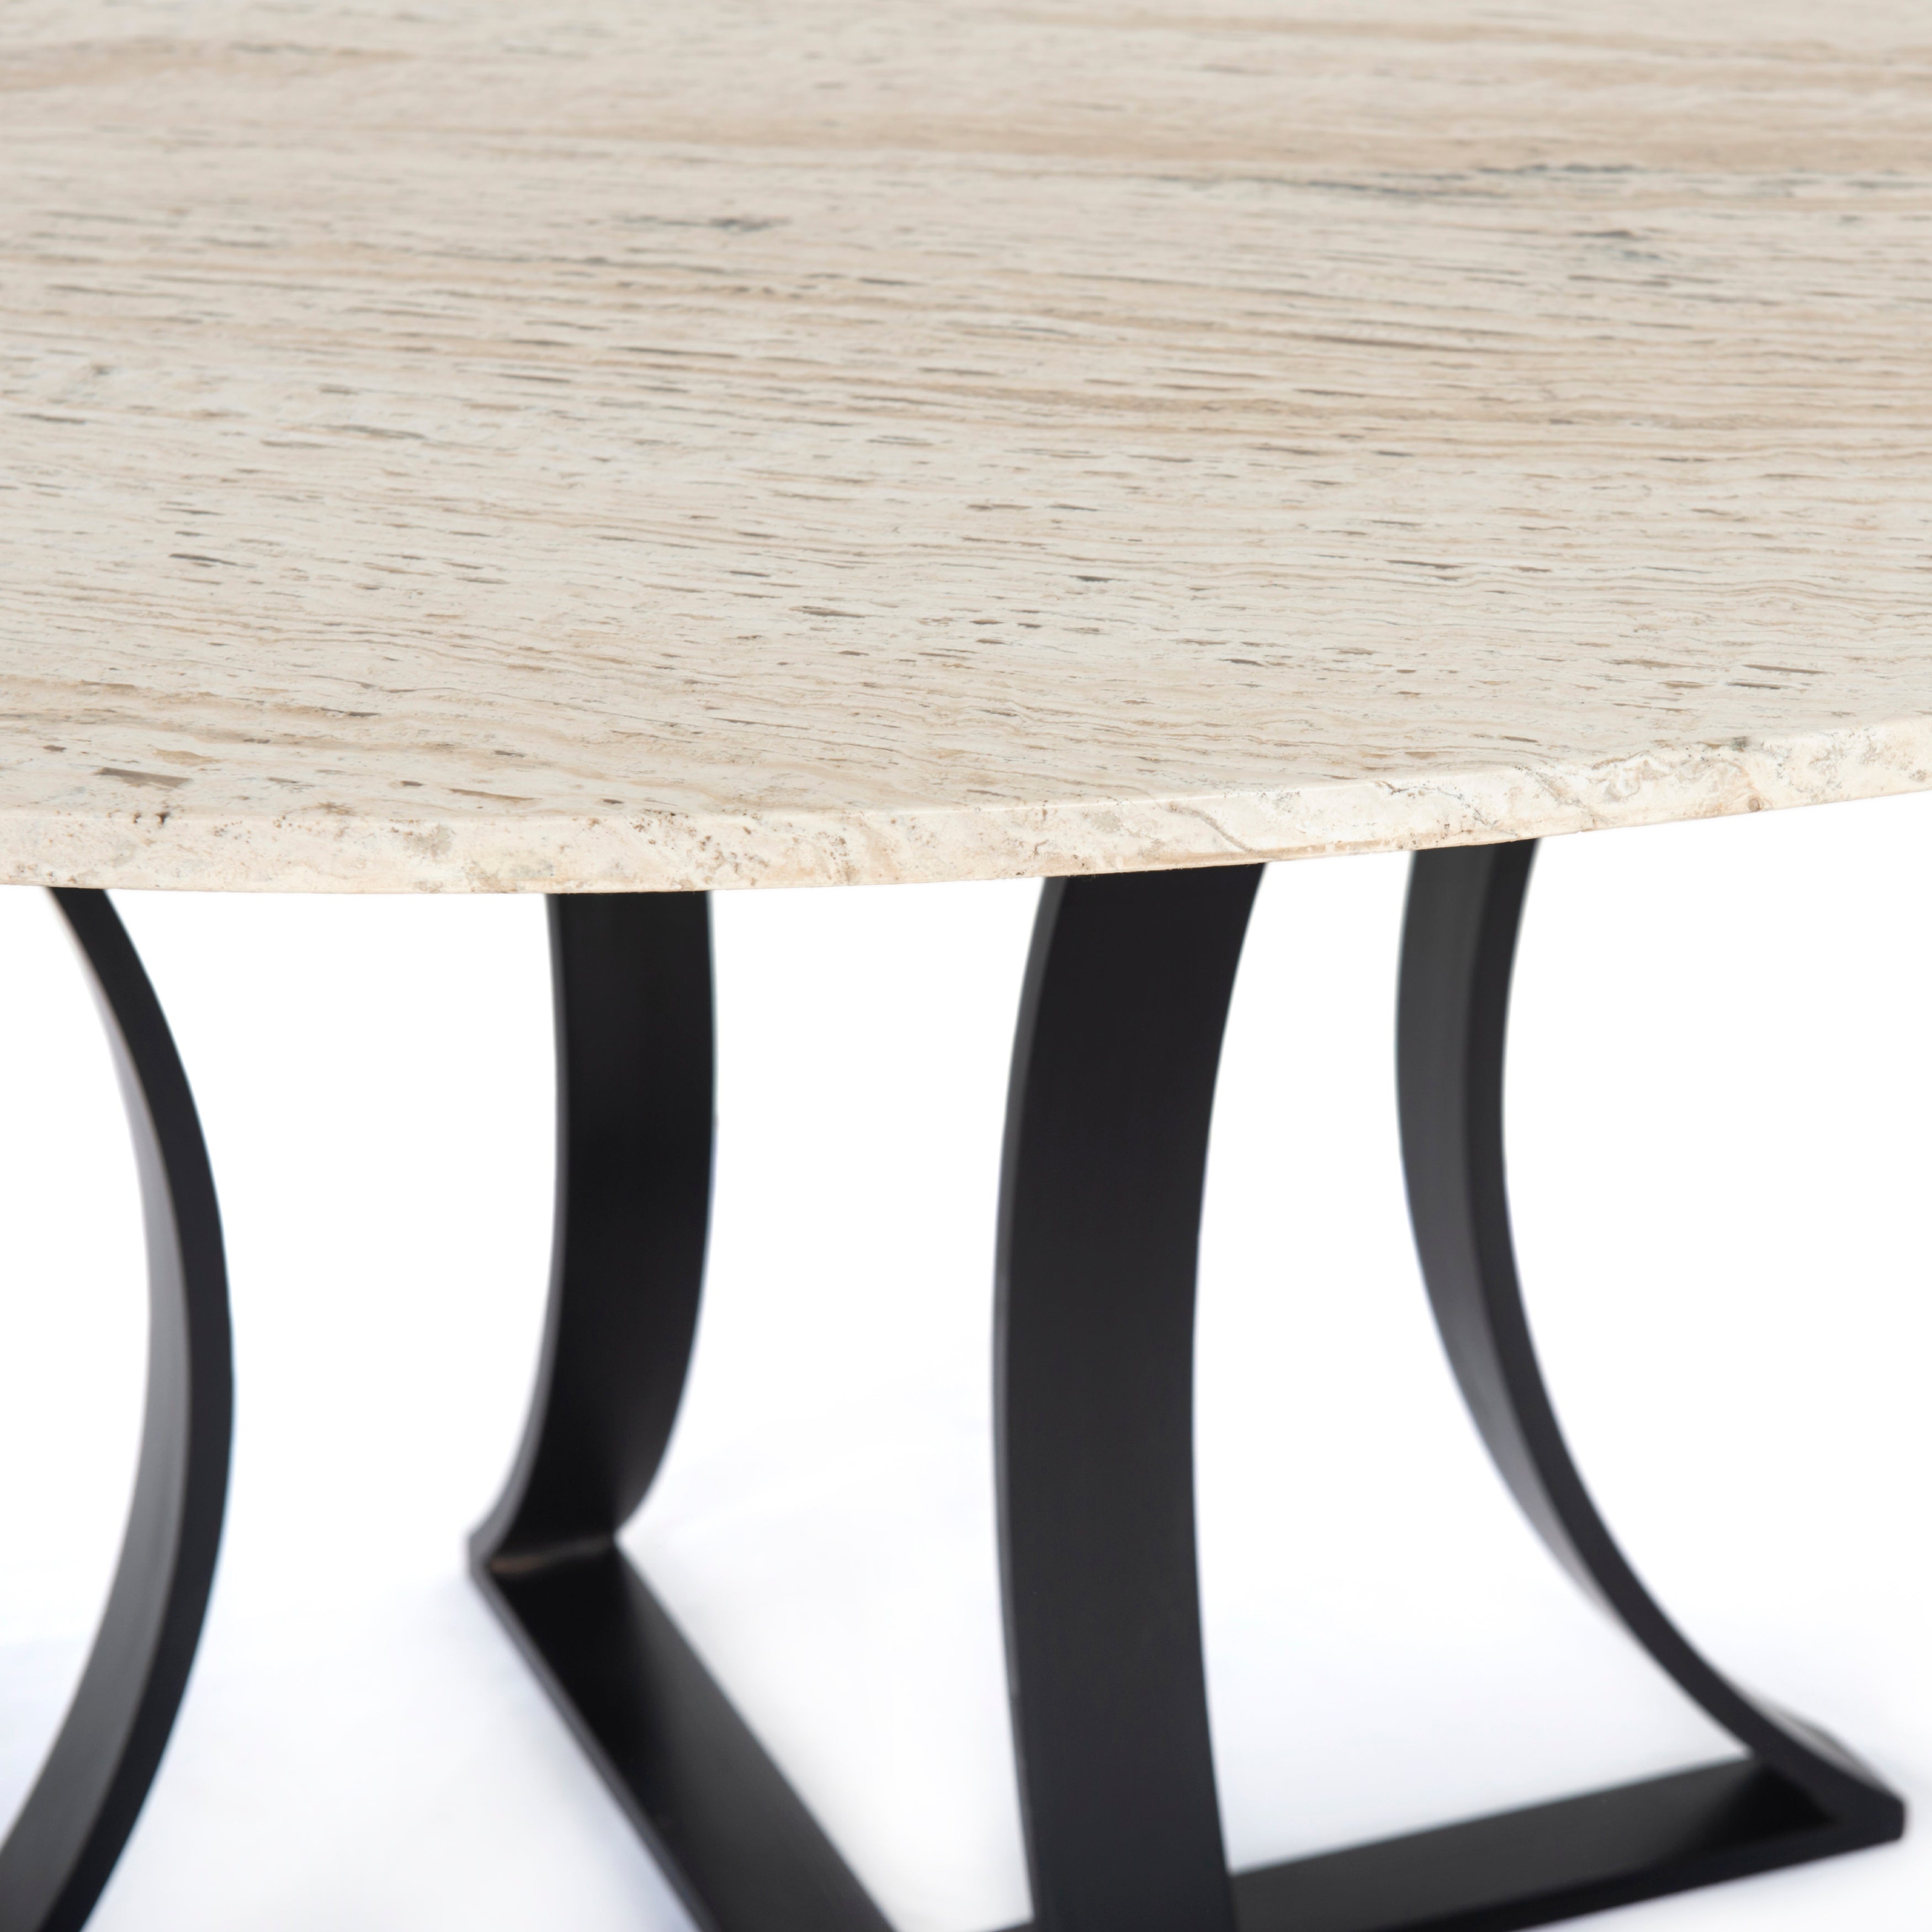 White Travertine with Dark Kettle Black Iron (60in Size) | Gage Dining Table | Valley Ridge Furniture